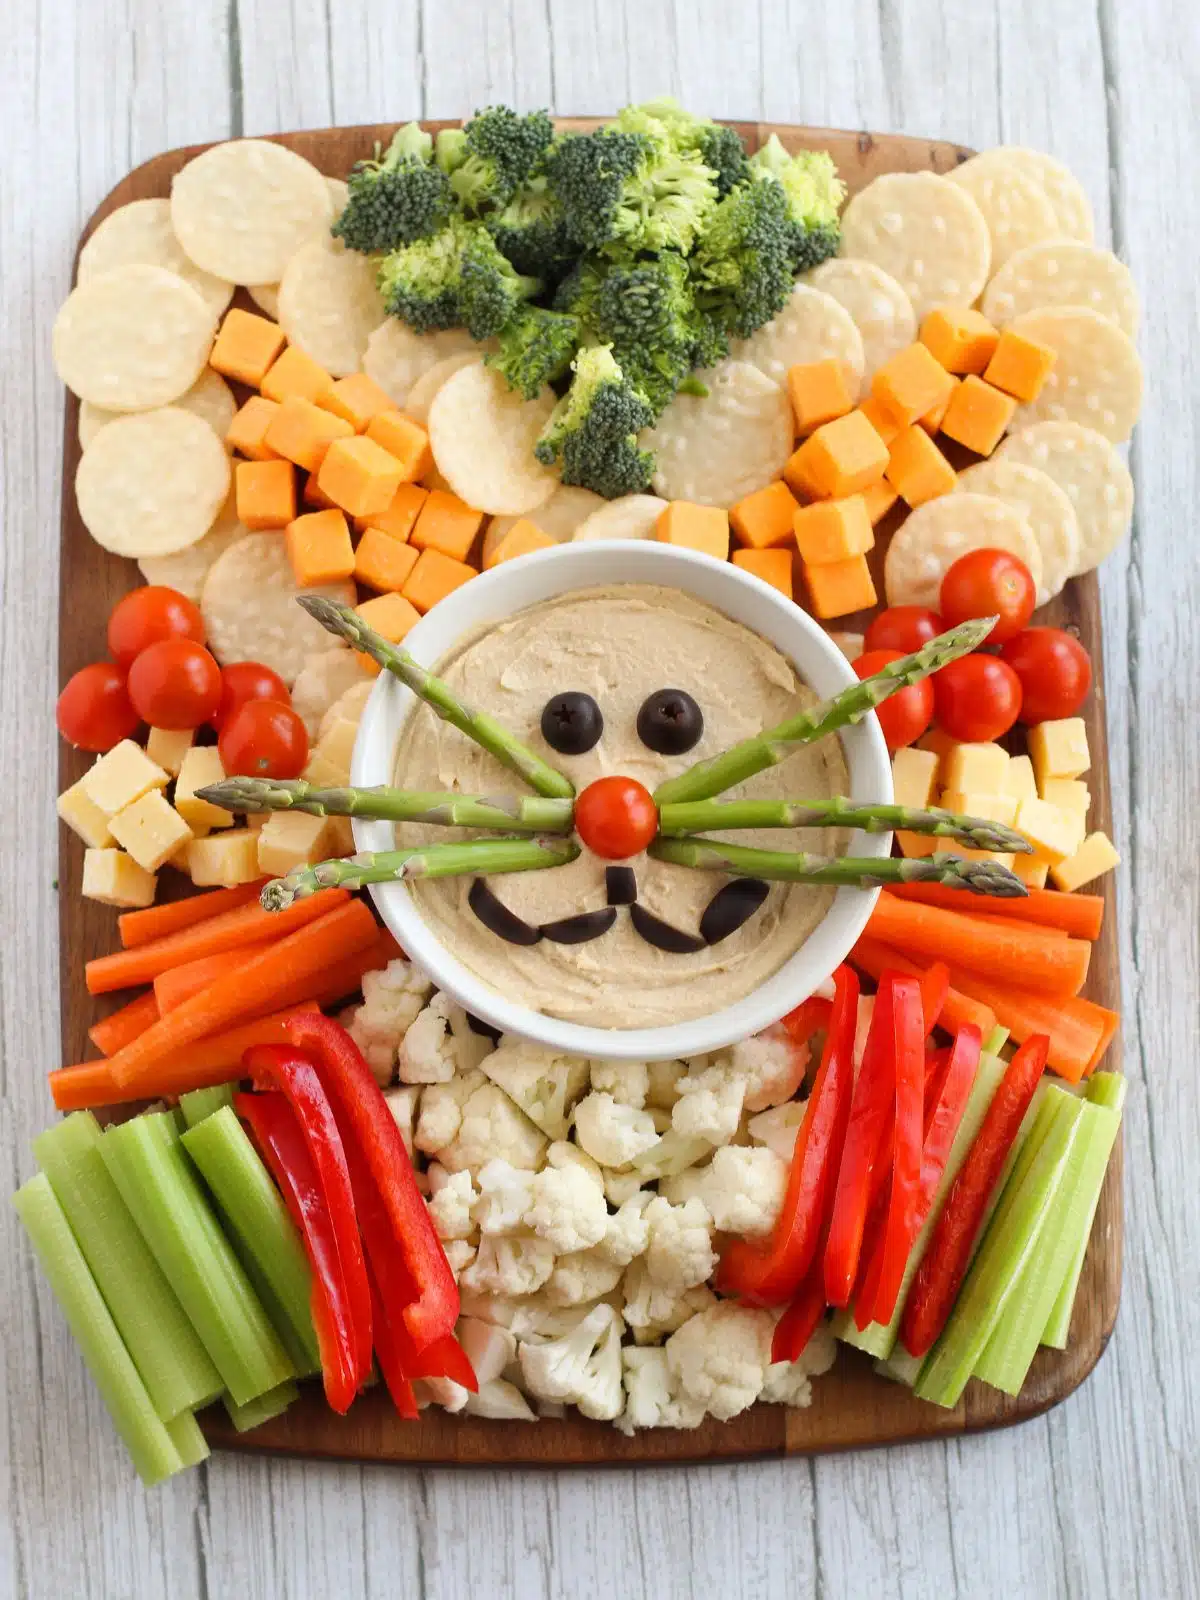 Bunny appetizer of hummus and vegetables